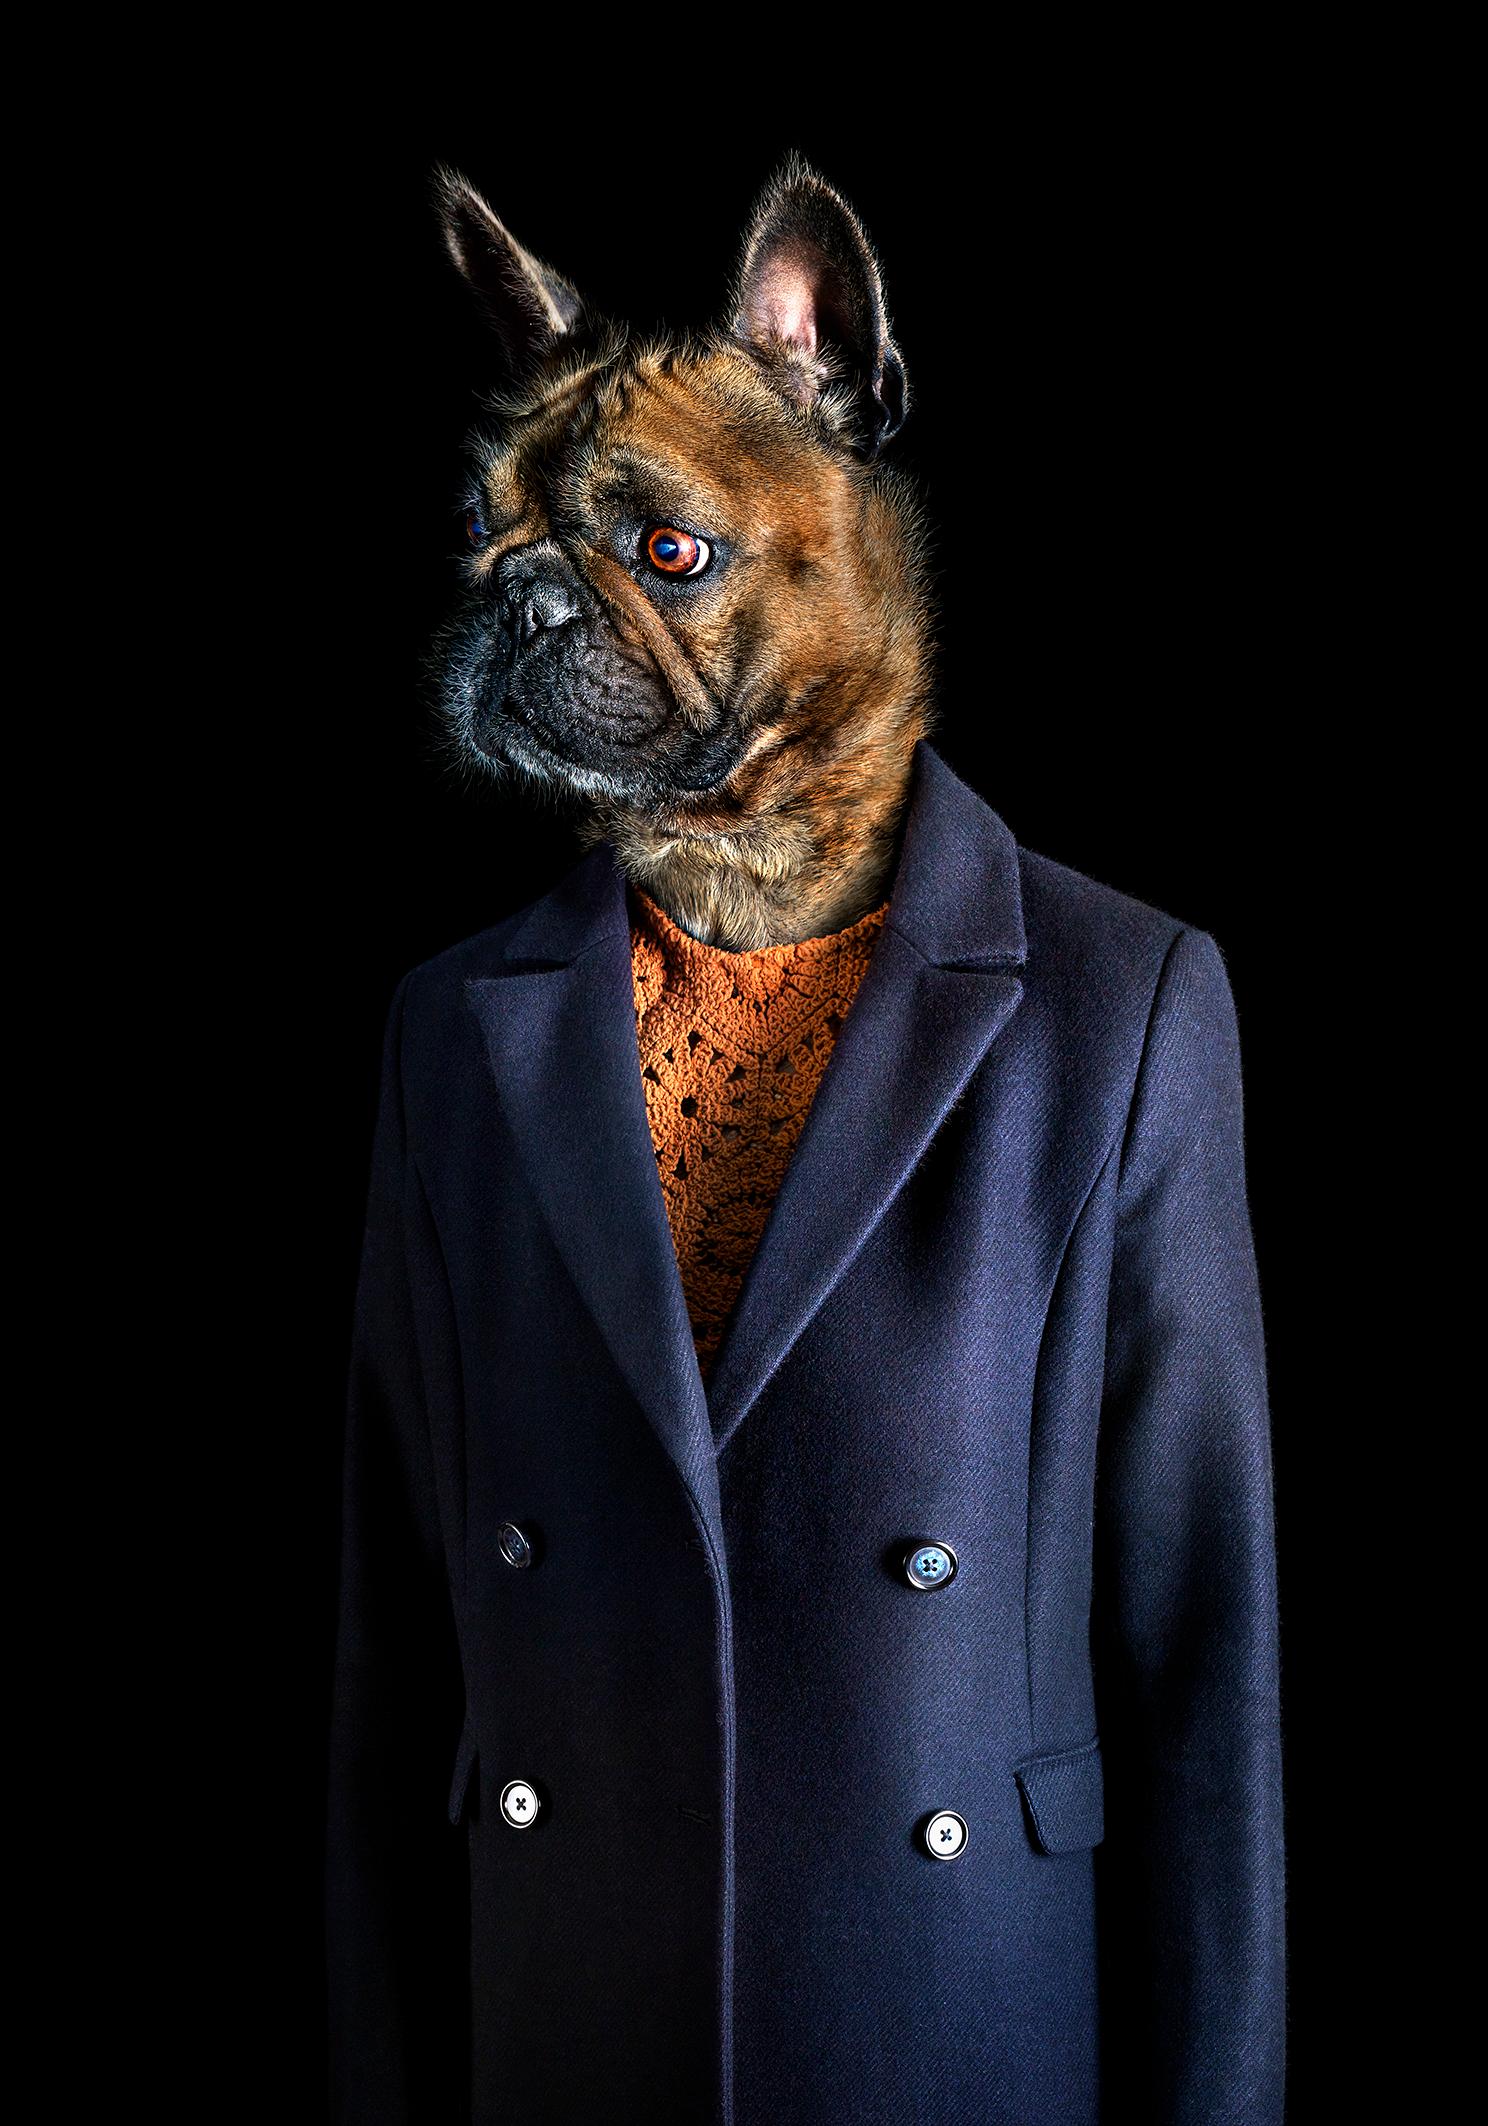 Miguel Vallinas Color Photograph - No.28 - Dog Dressed in a Blue Jacket, Dark, Portrait of a Dog